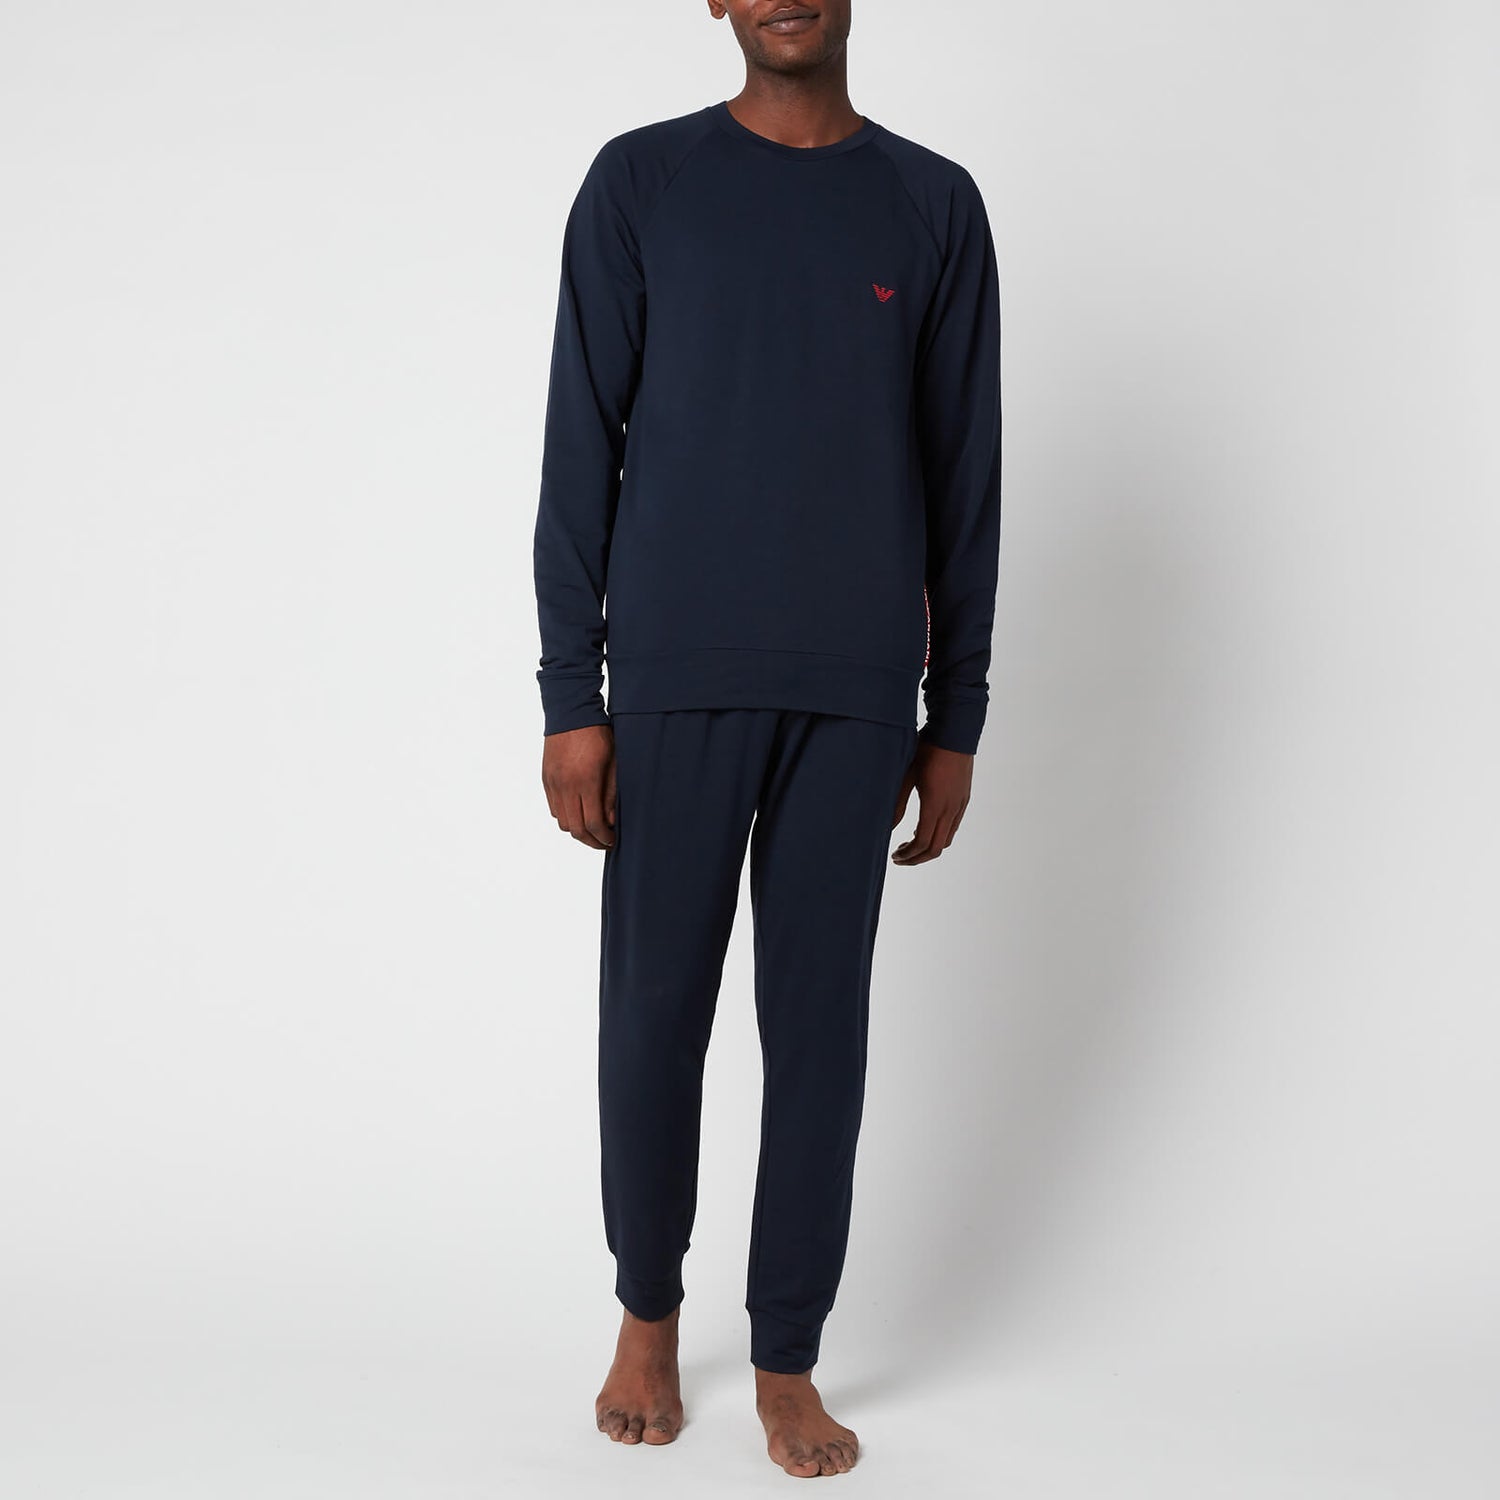 Emporio Armani Men's Stretch Terry Sweatshirt and Trousers Set - Blue